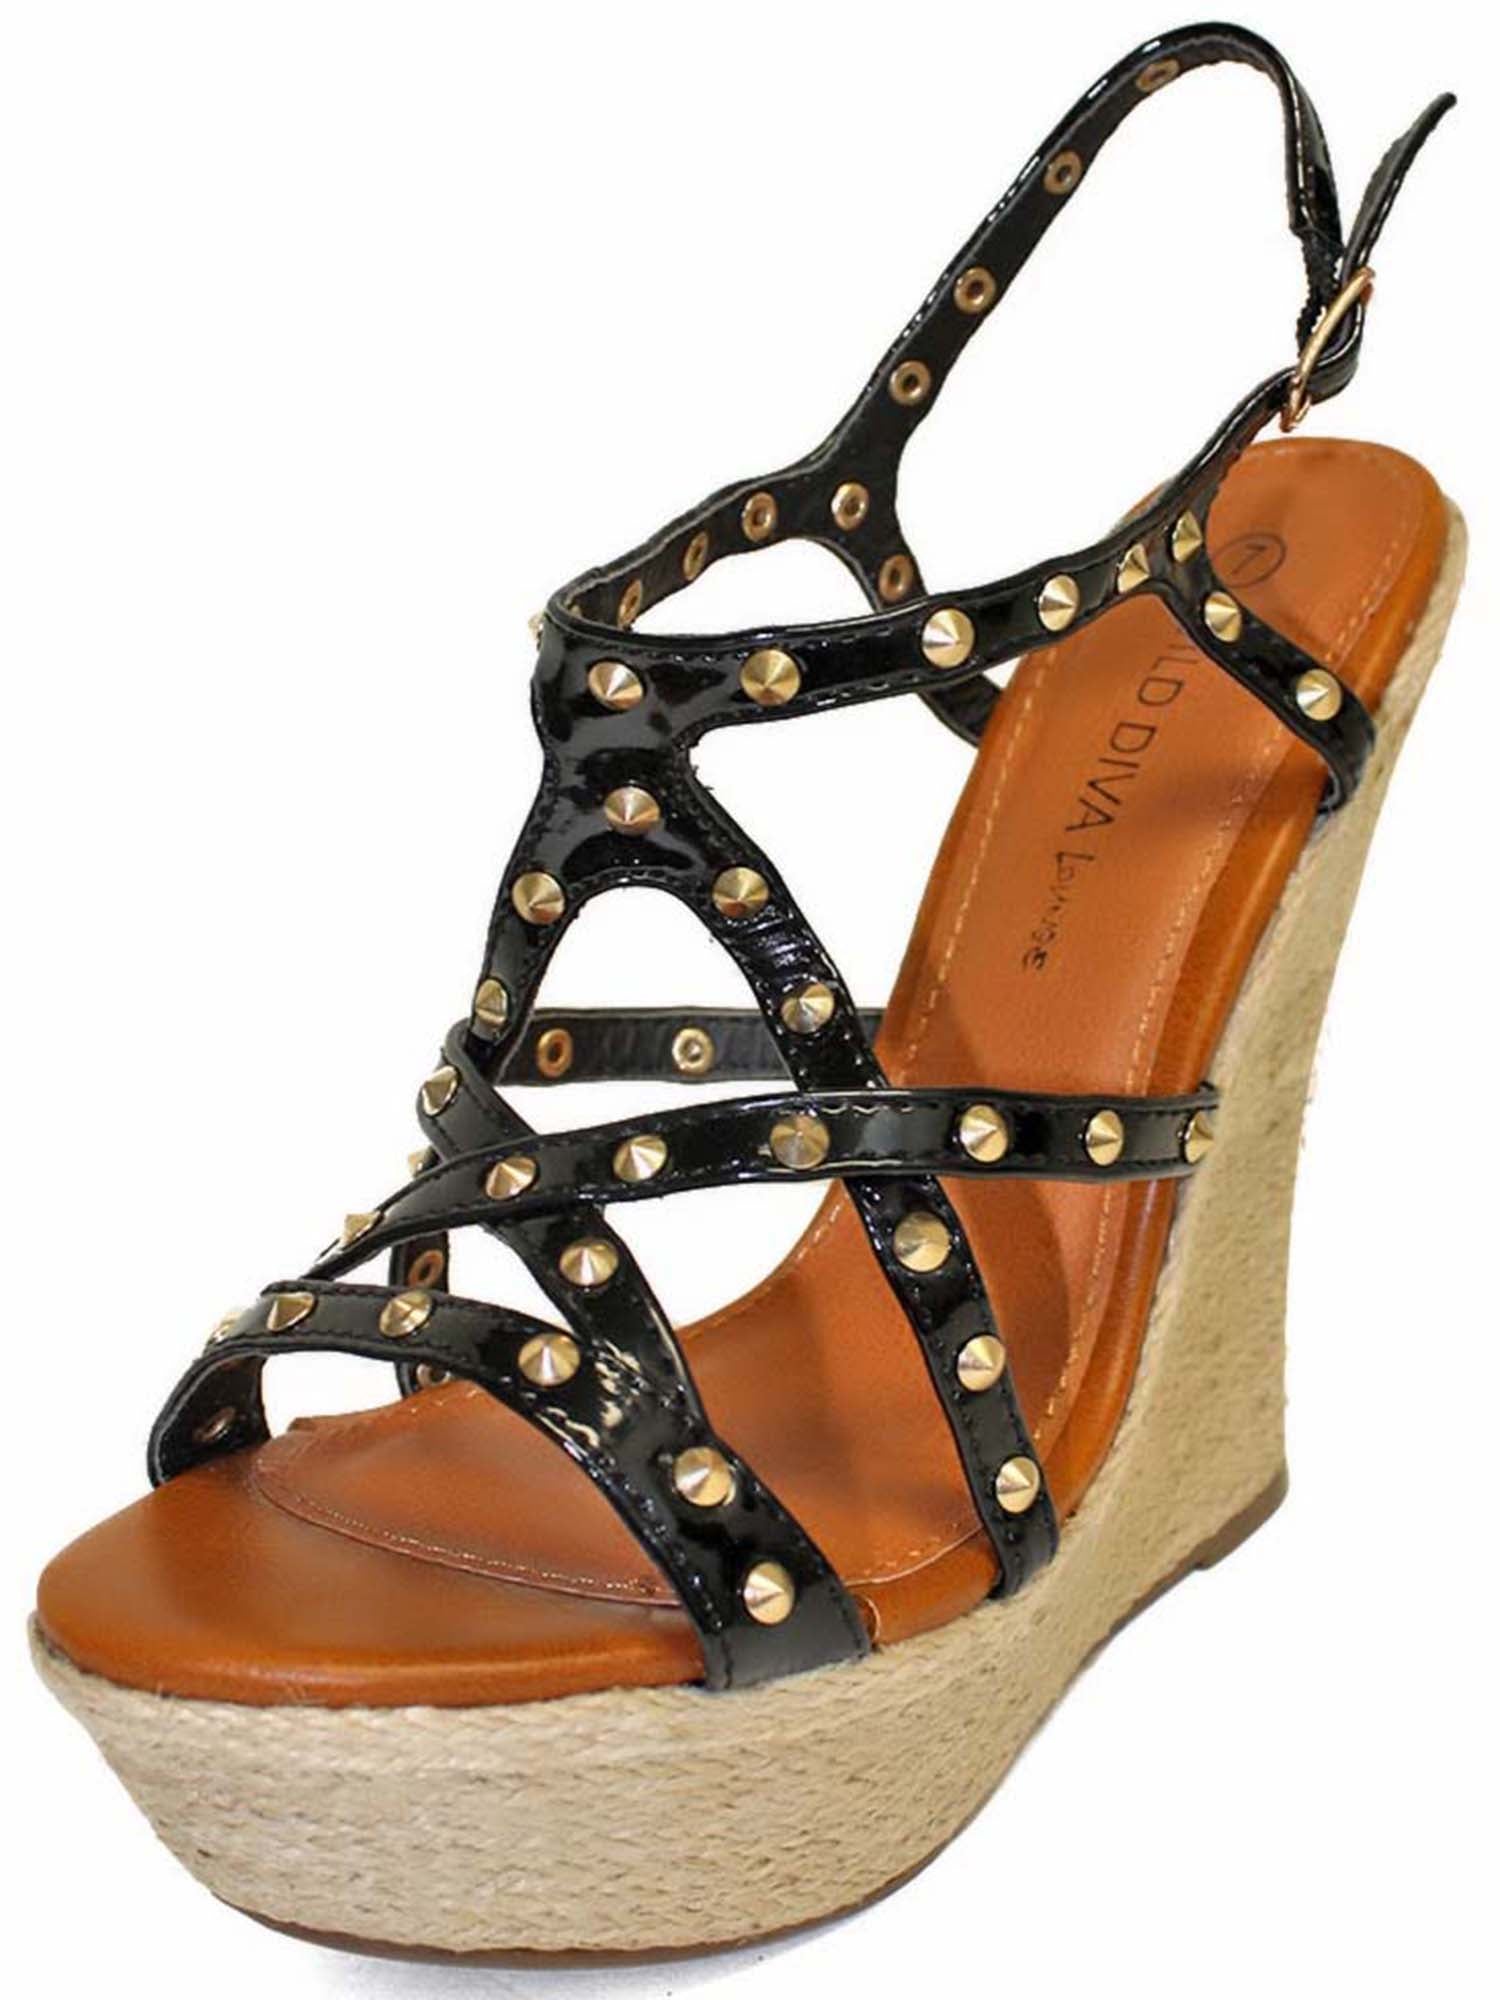 Wedge-heeled Sandals - Gold-colored - Ladies | H&M US